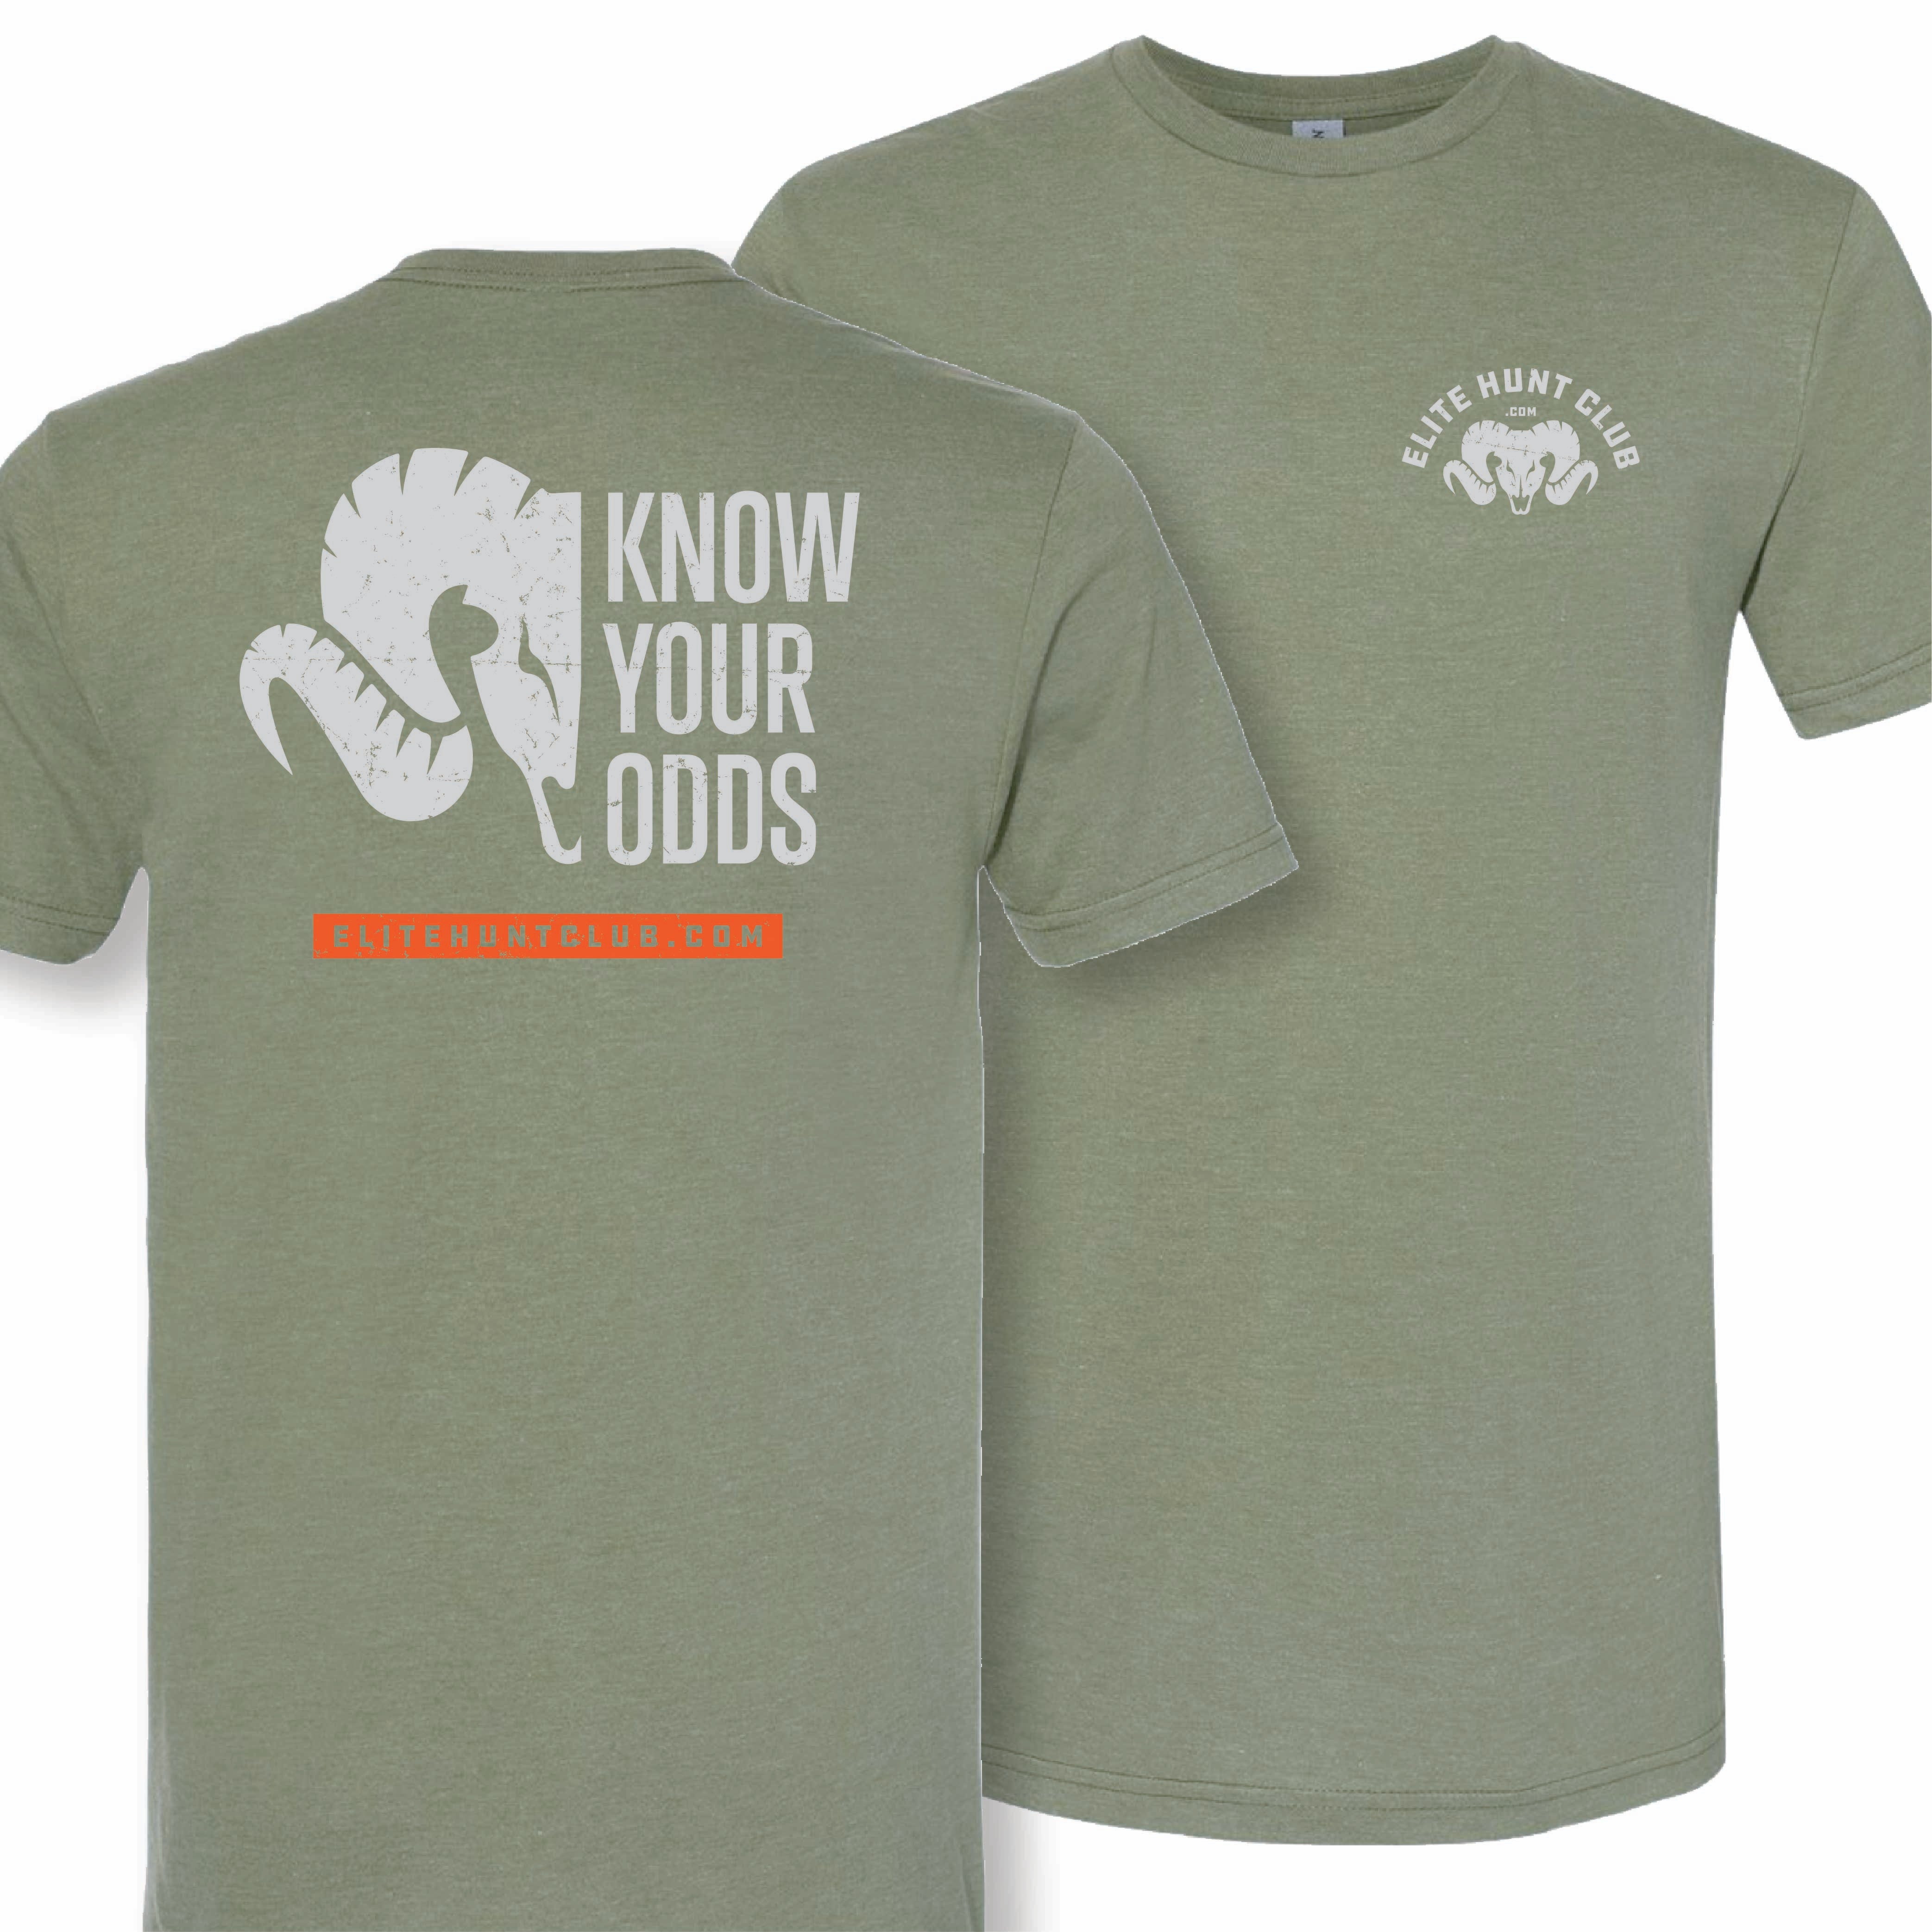 EHC Know Your Odds T-Shirt